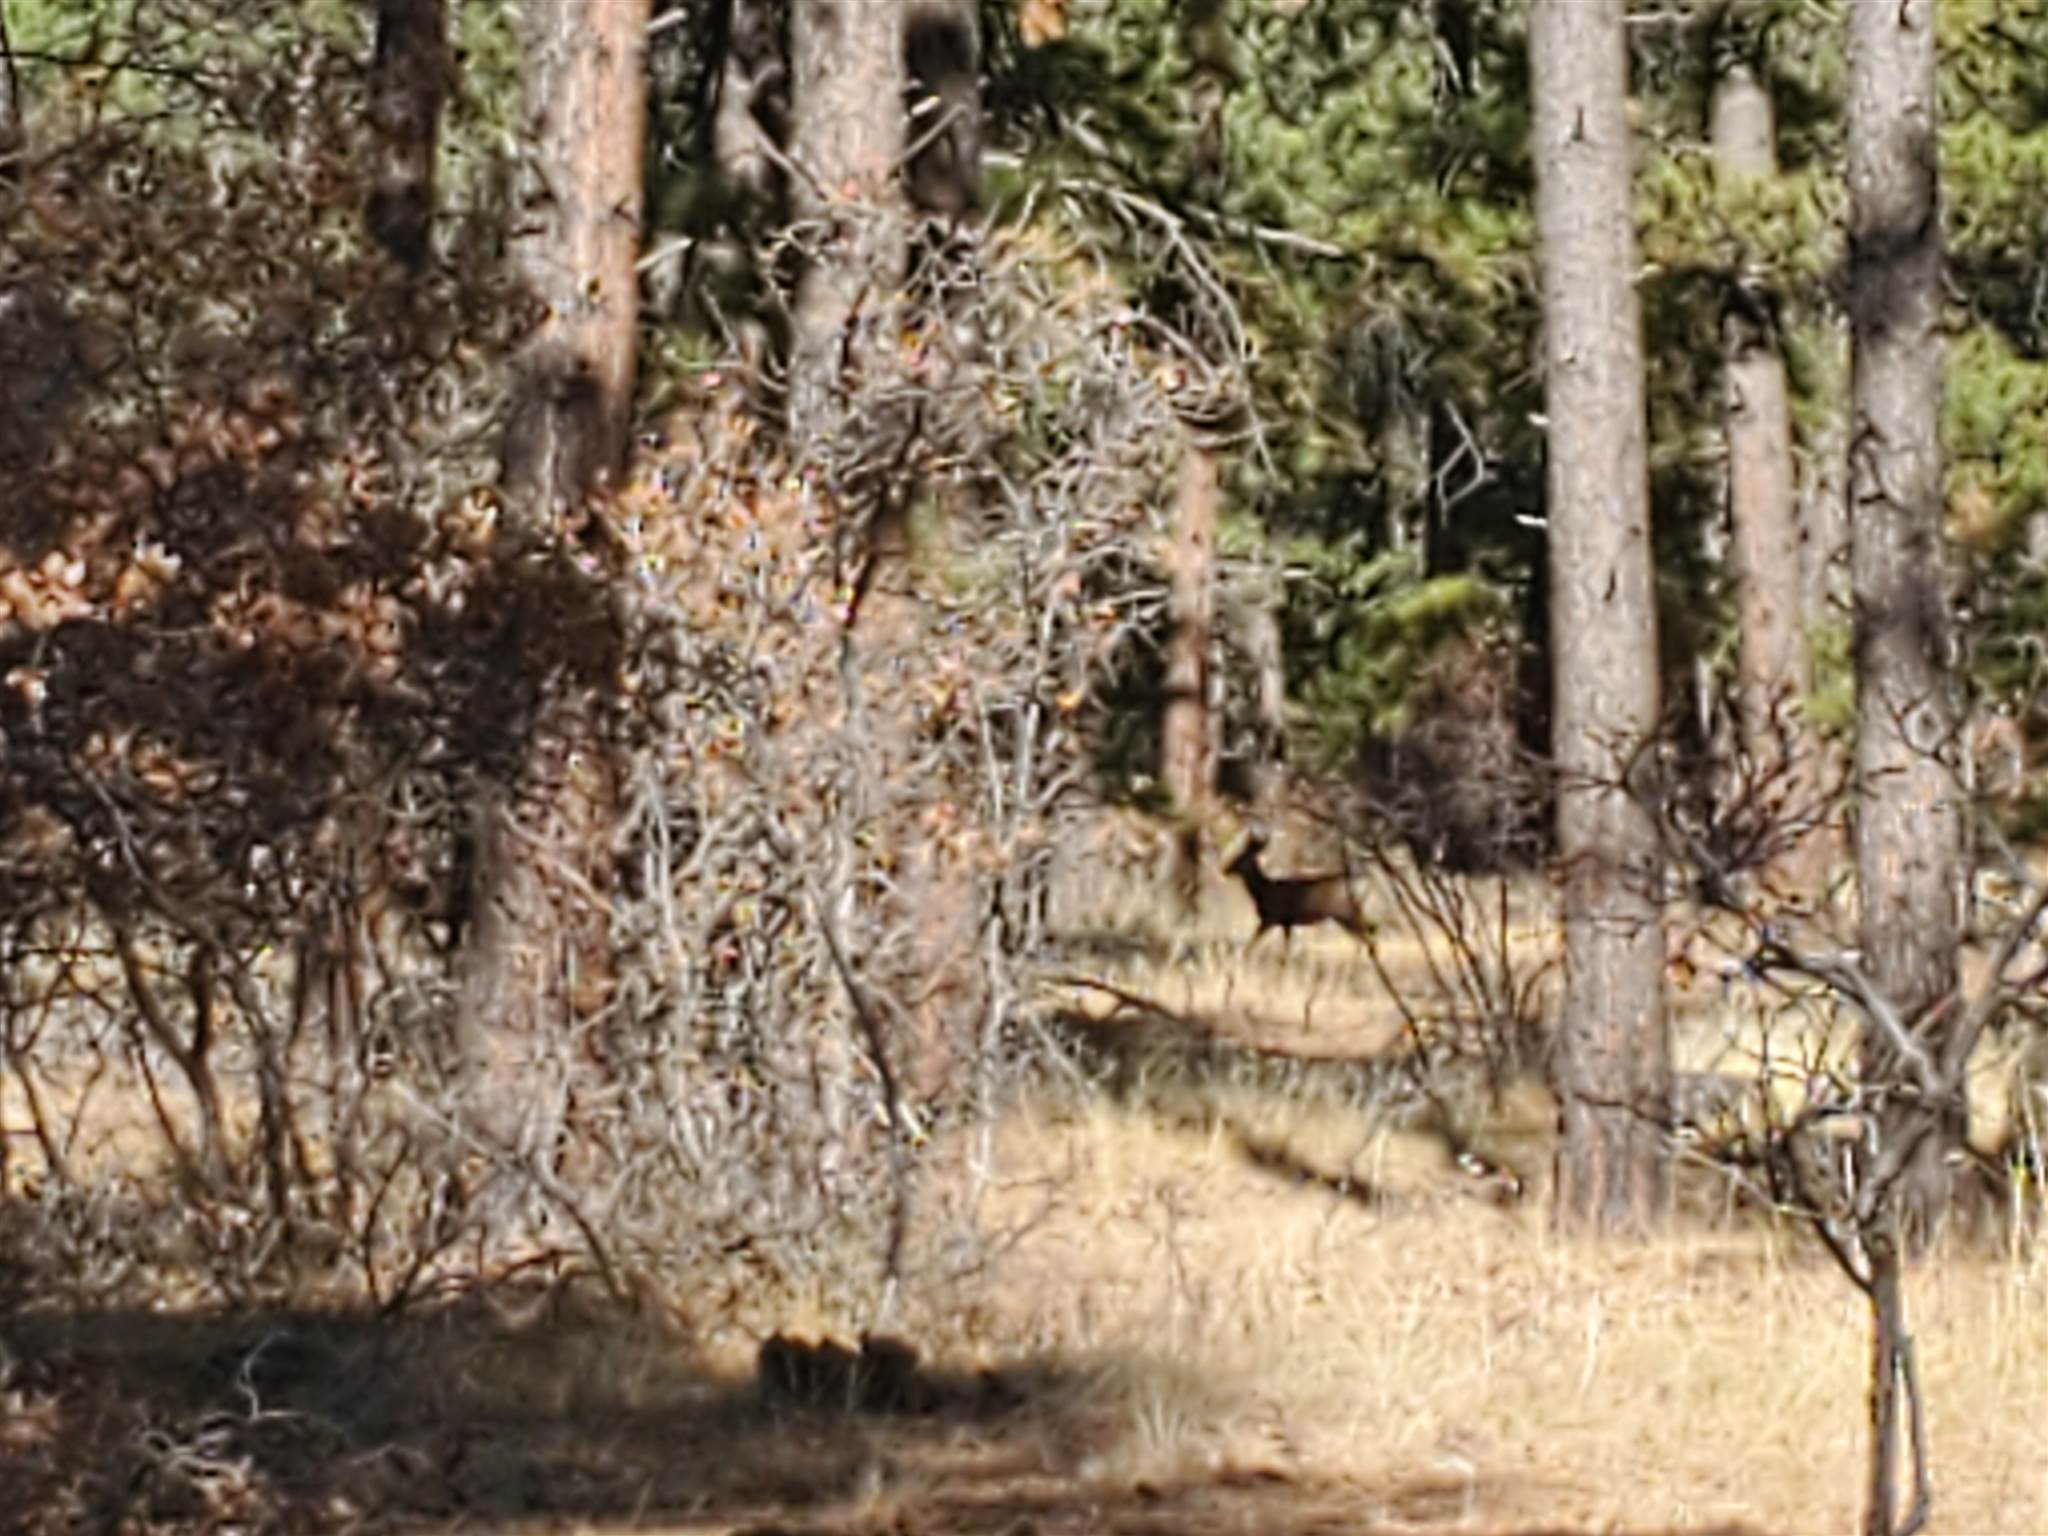 TBD North, Chama, New Mexico 87520, ,Land,For Sale,TBD North,201905307